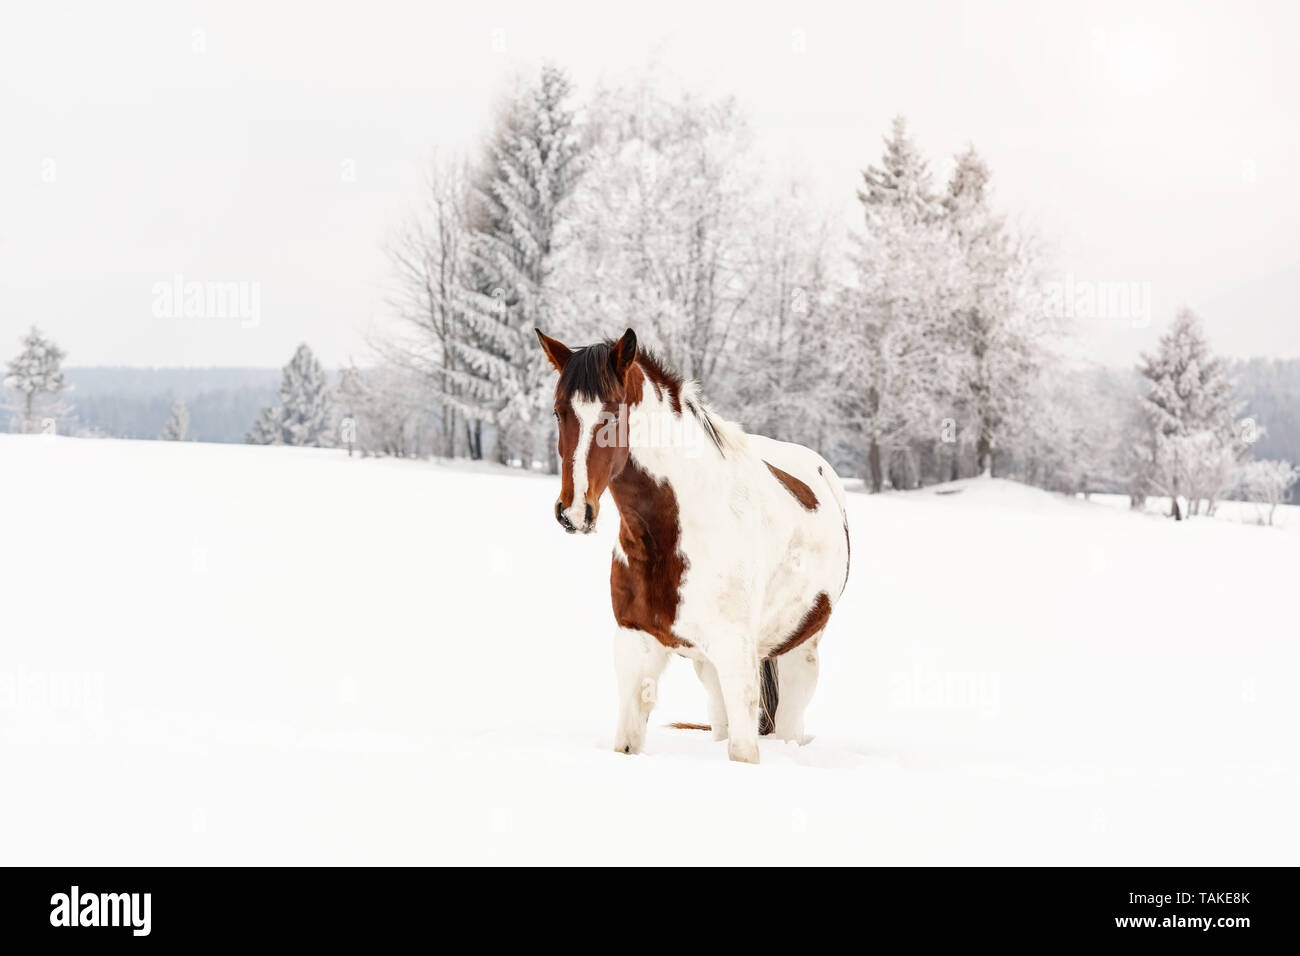 Brown and white horse, Slovak Warmblood breed, walking on snow, blurred trees and mountains in background, view from front Stock Photo